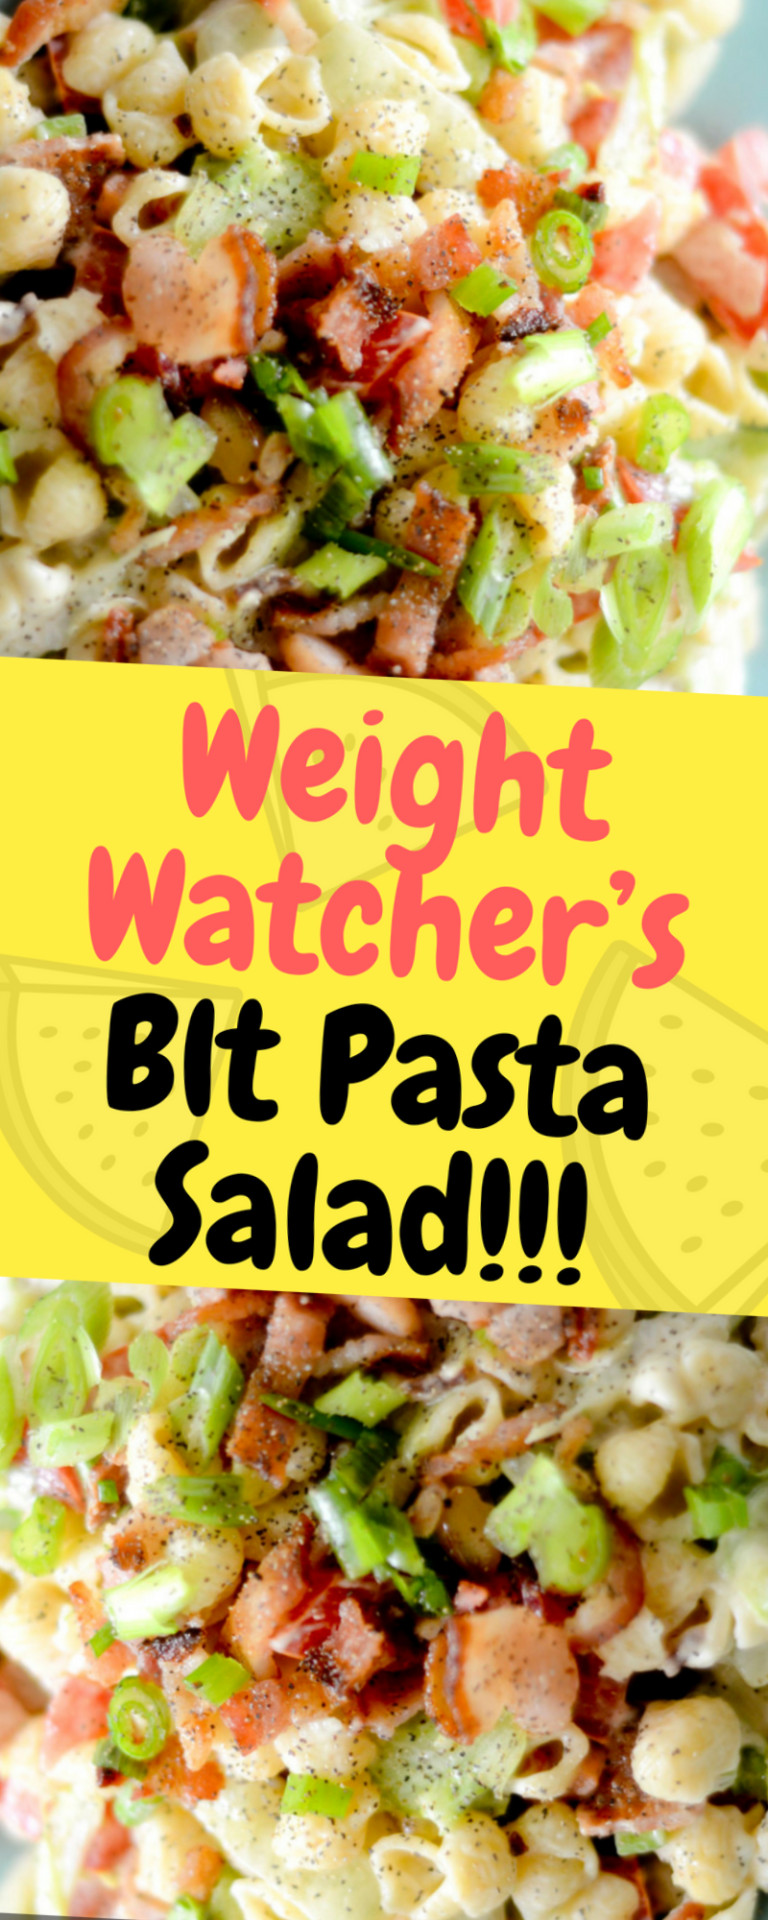 Weight Watchers Blt Pasta Salad
 Pin on Weight loss